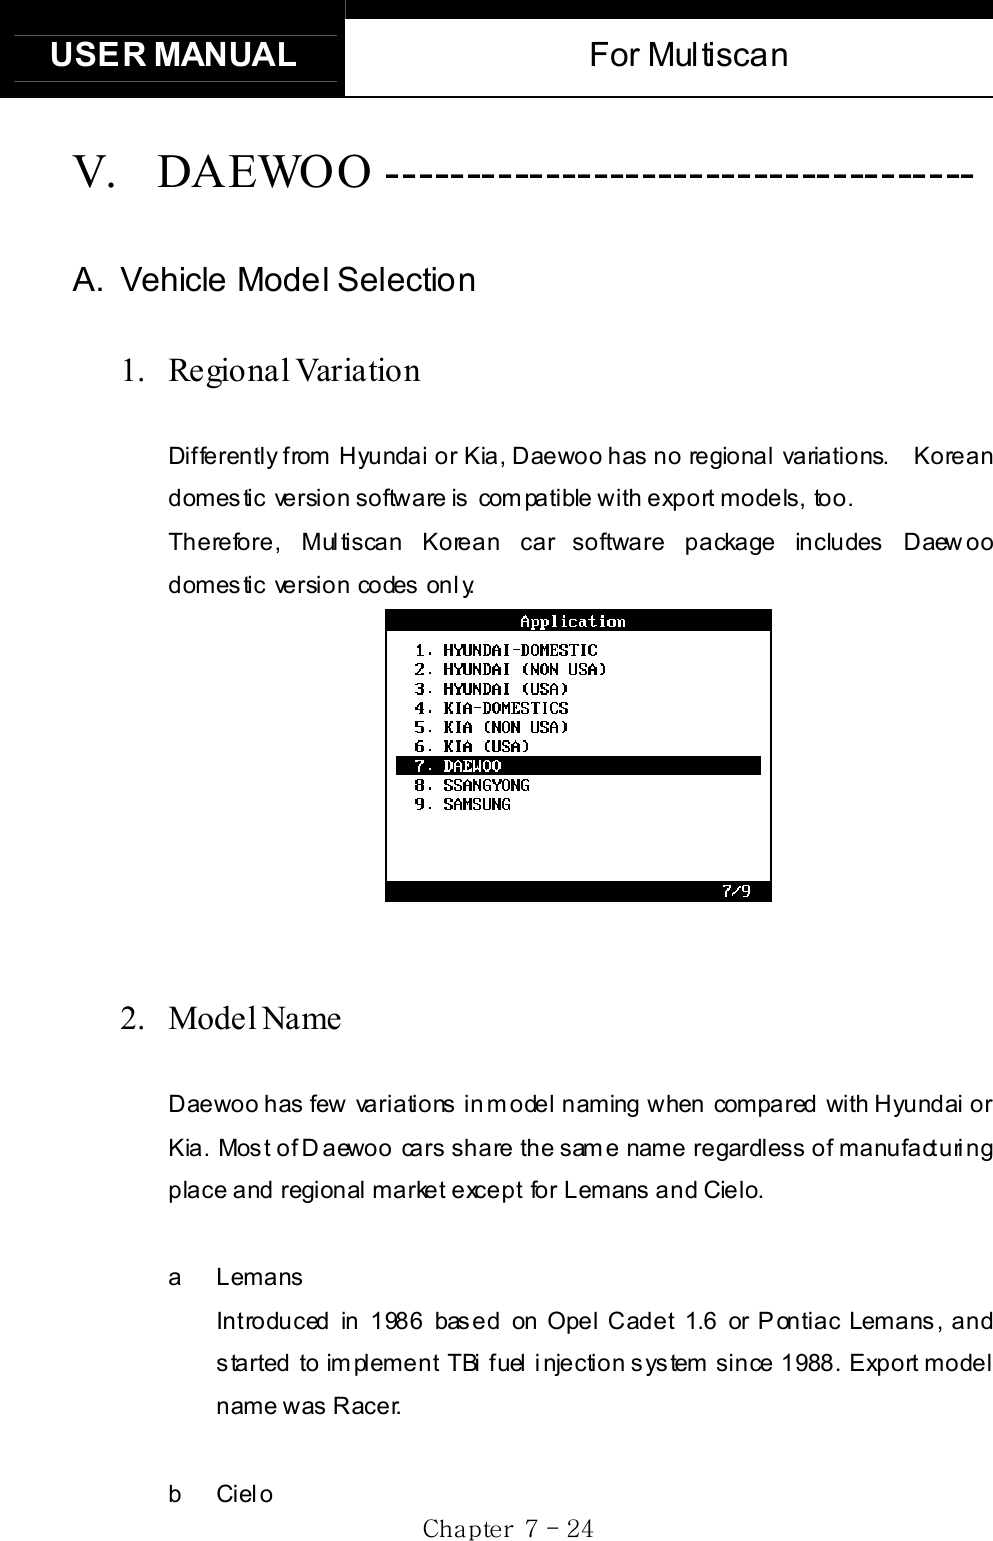 USER MANUAL  For Multiscan Gj  G^G TGY[GV. DAEWOO ------------------------------------- A.  Vehicle Model Selection 1.  Re gio nal Varia tio n Differently from Hyundai or Kia, Daewoo has no regional variations.    Korean domestic  version software is  compatible with export models, too. Therefore, Multiscan Korean car software package includes Daewoo domestic version codes only. 2. Model Name  GDaewoo has few  variations in model naming when  compared  with Hyundai or Kia. Most of Daewoo cars share the same name regardless of manufacturing place and regional market except for Lemans and Cielo. a Lemans Introduced in 1986 based on Opel Cadet 1.6 or Pontiac Lemans, and started to implement TBi fuel injection system since 1988. Export model name was Racer. b Cielo 